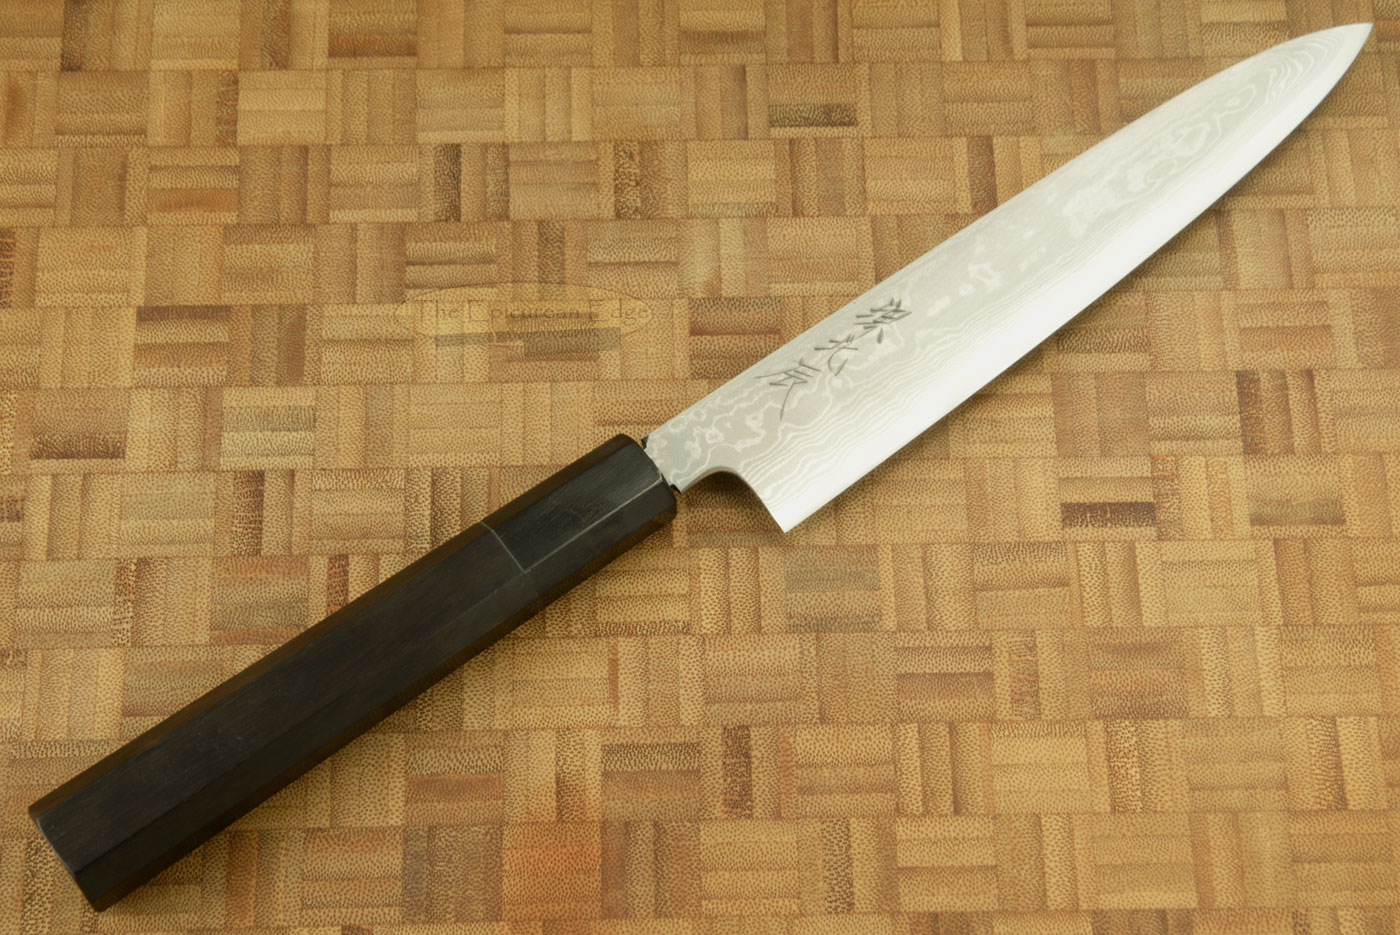 Damascus Slicing Knife - Petty, 180mm (7-1/8 in)